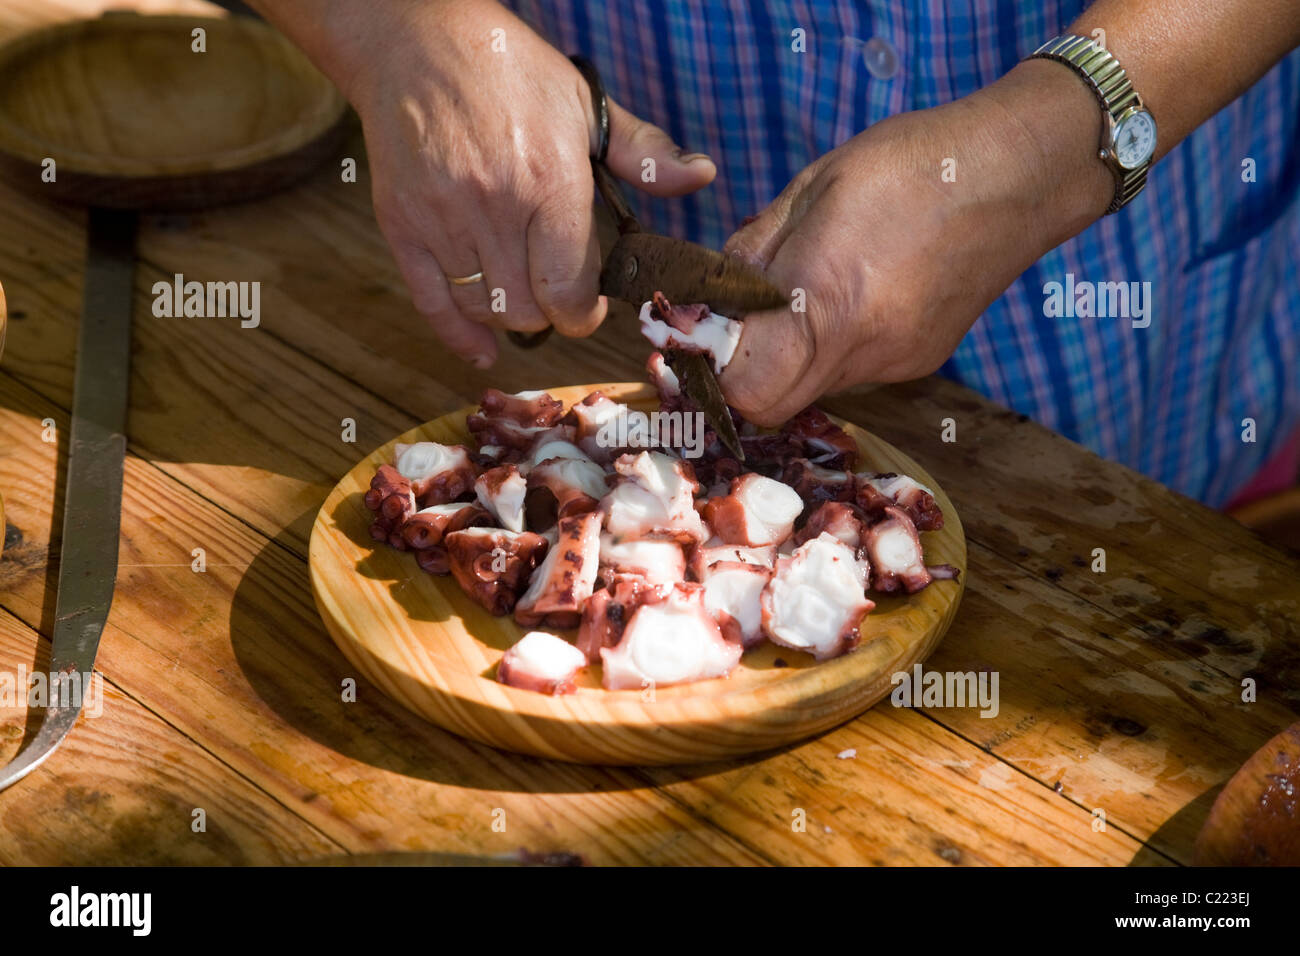 A woman prepares a traditional dish of Pulpo Gallego (Gallician Octopus) Stock Photo